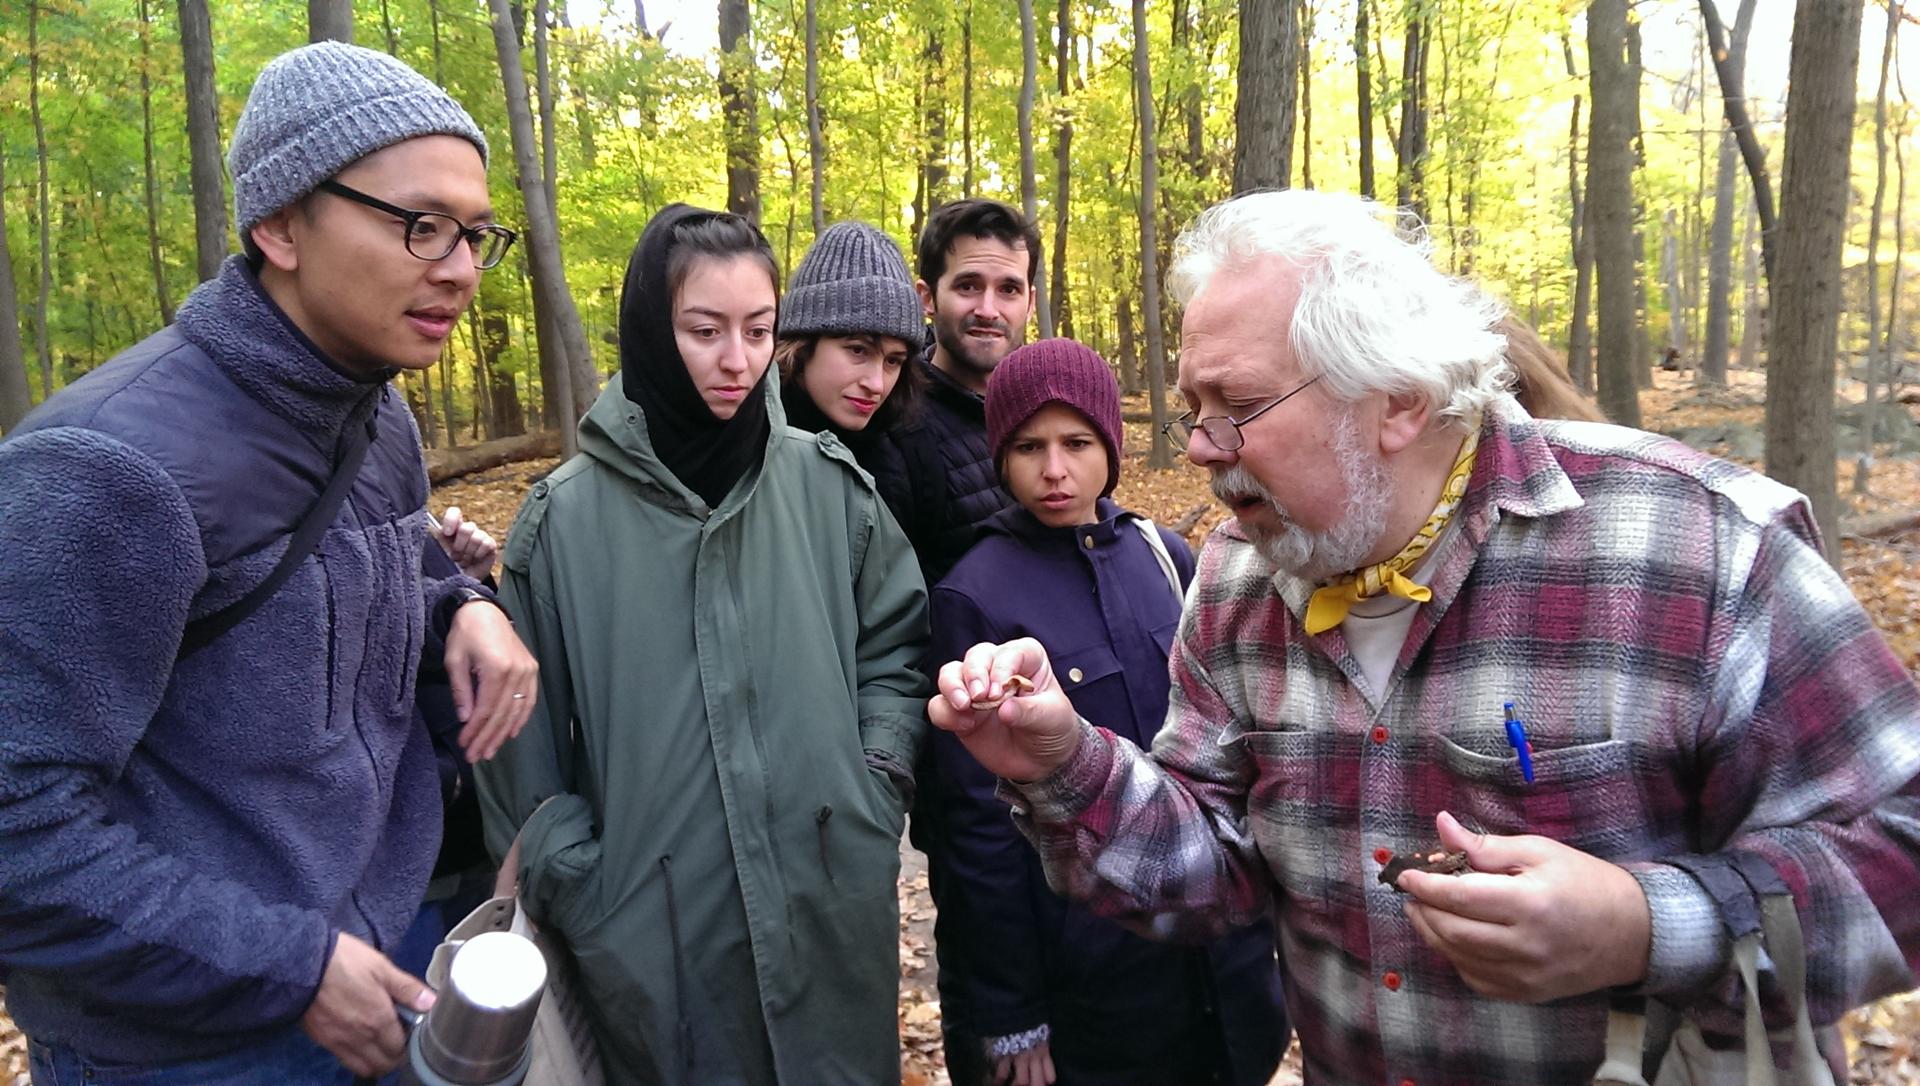 Gary Lincoff, author of The Audubon Society Field Guide to North American Mushrooms, helps my fellow mushrooms hunters identify their finds in the woods of Piermont, NY.